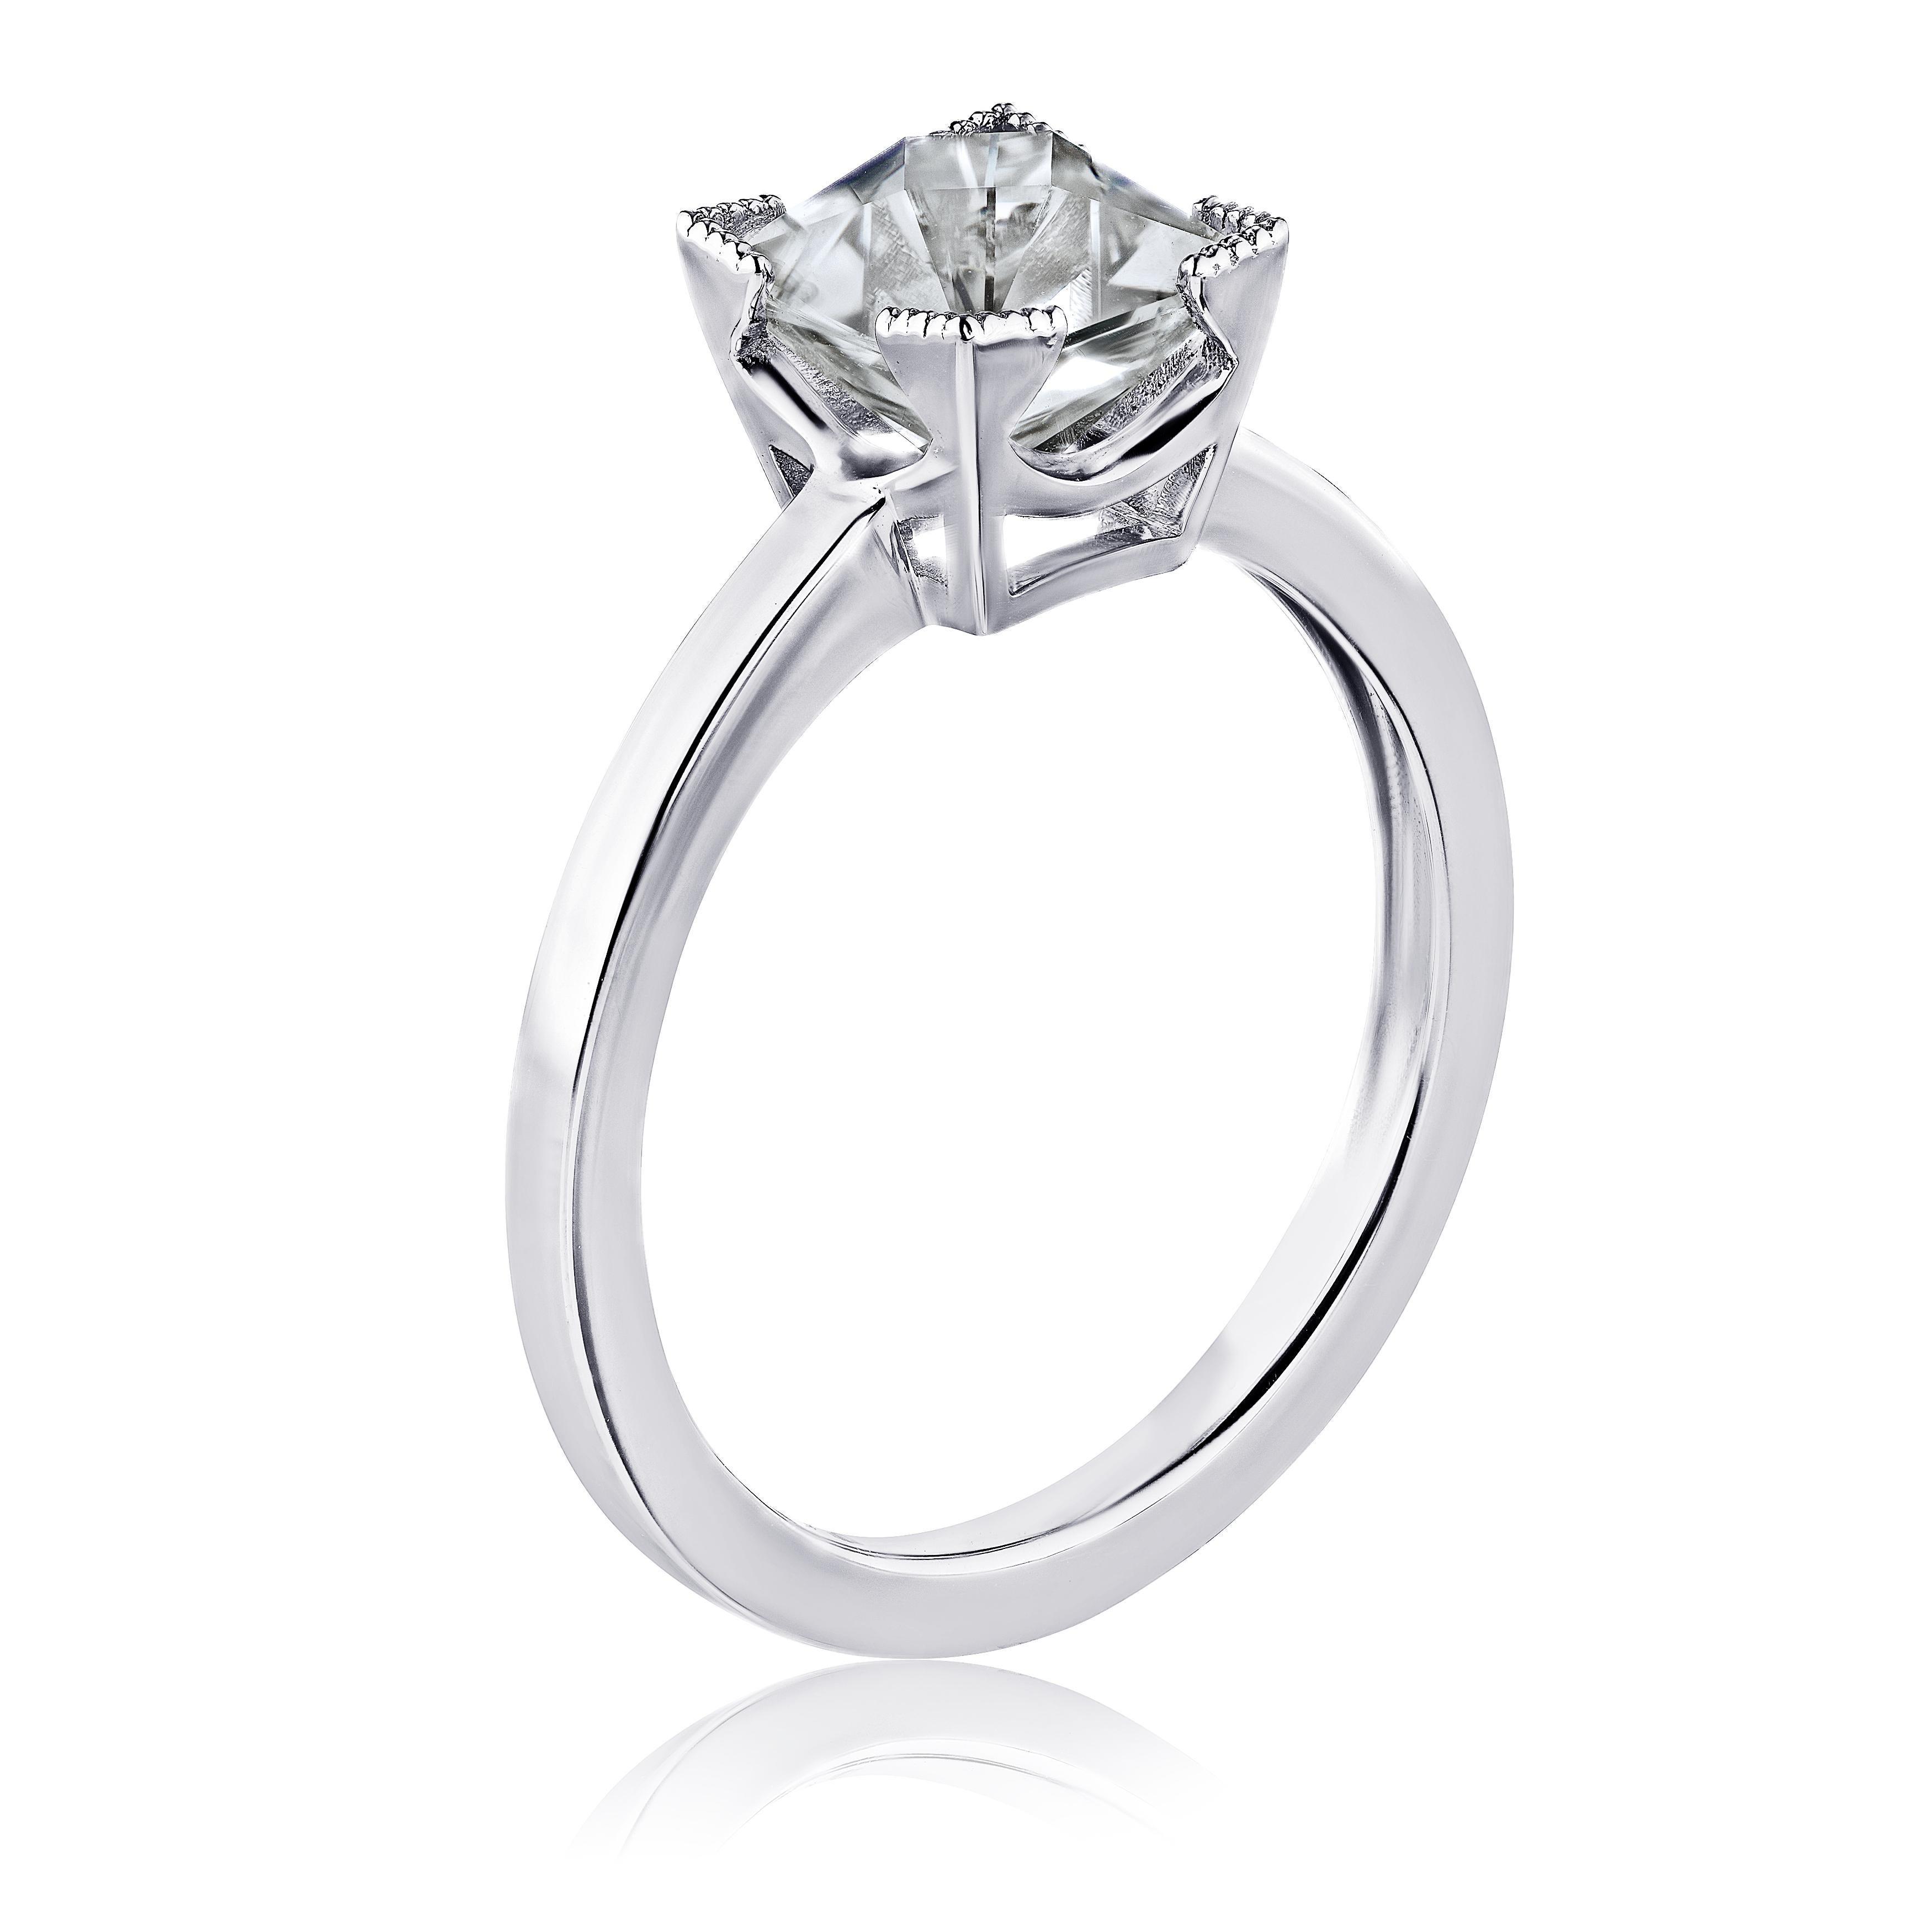 Unique sparkling one of a kind GIA French cut diamond . 1.79 cts H color VS2 clarity . 
Early 20th century cutting style . Diamond in platinum ring finger size 6. Can be modified upon request to any finger size . 
Certified  Guaranteed Mined Diamond